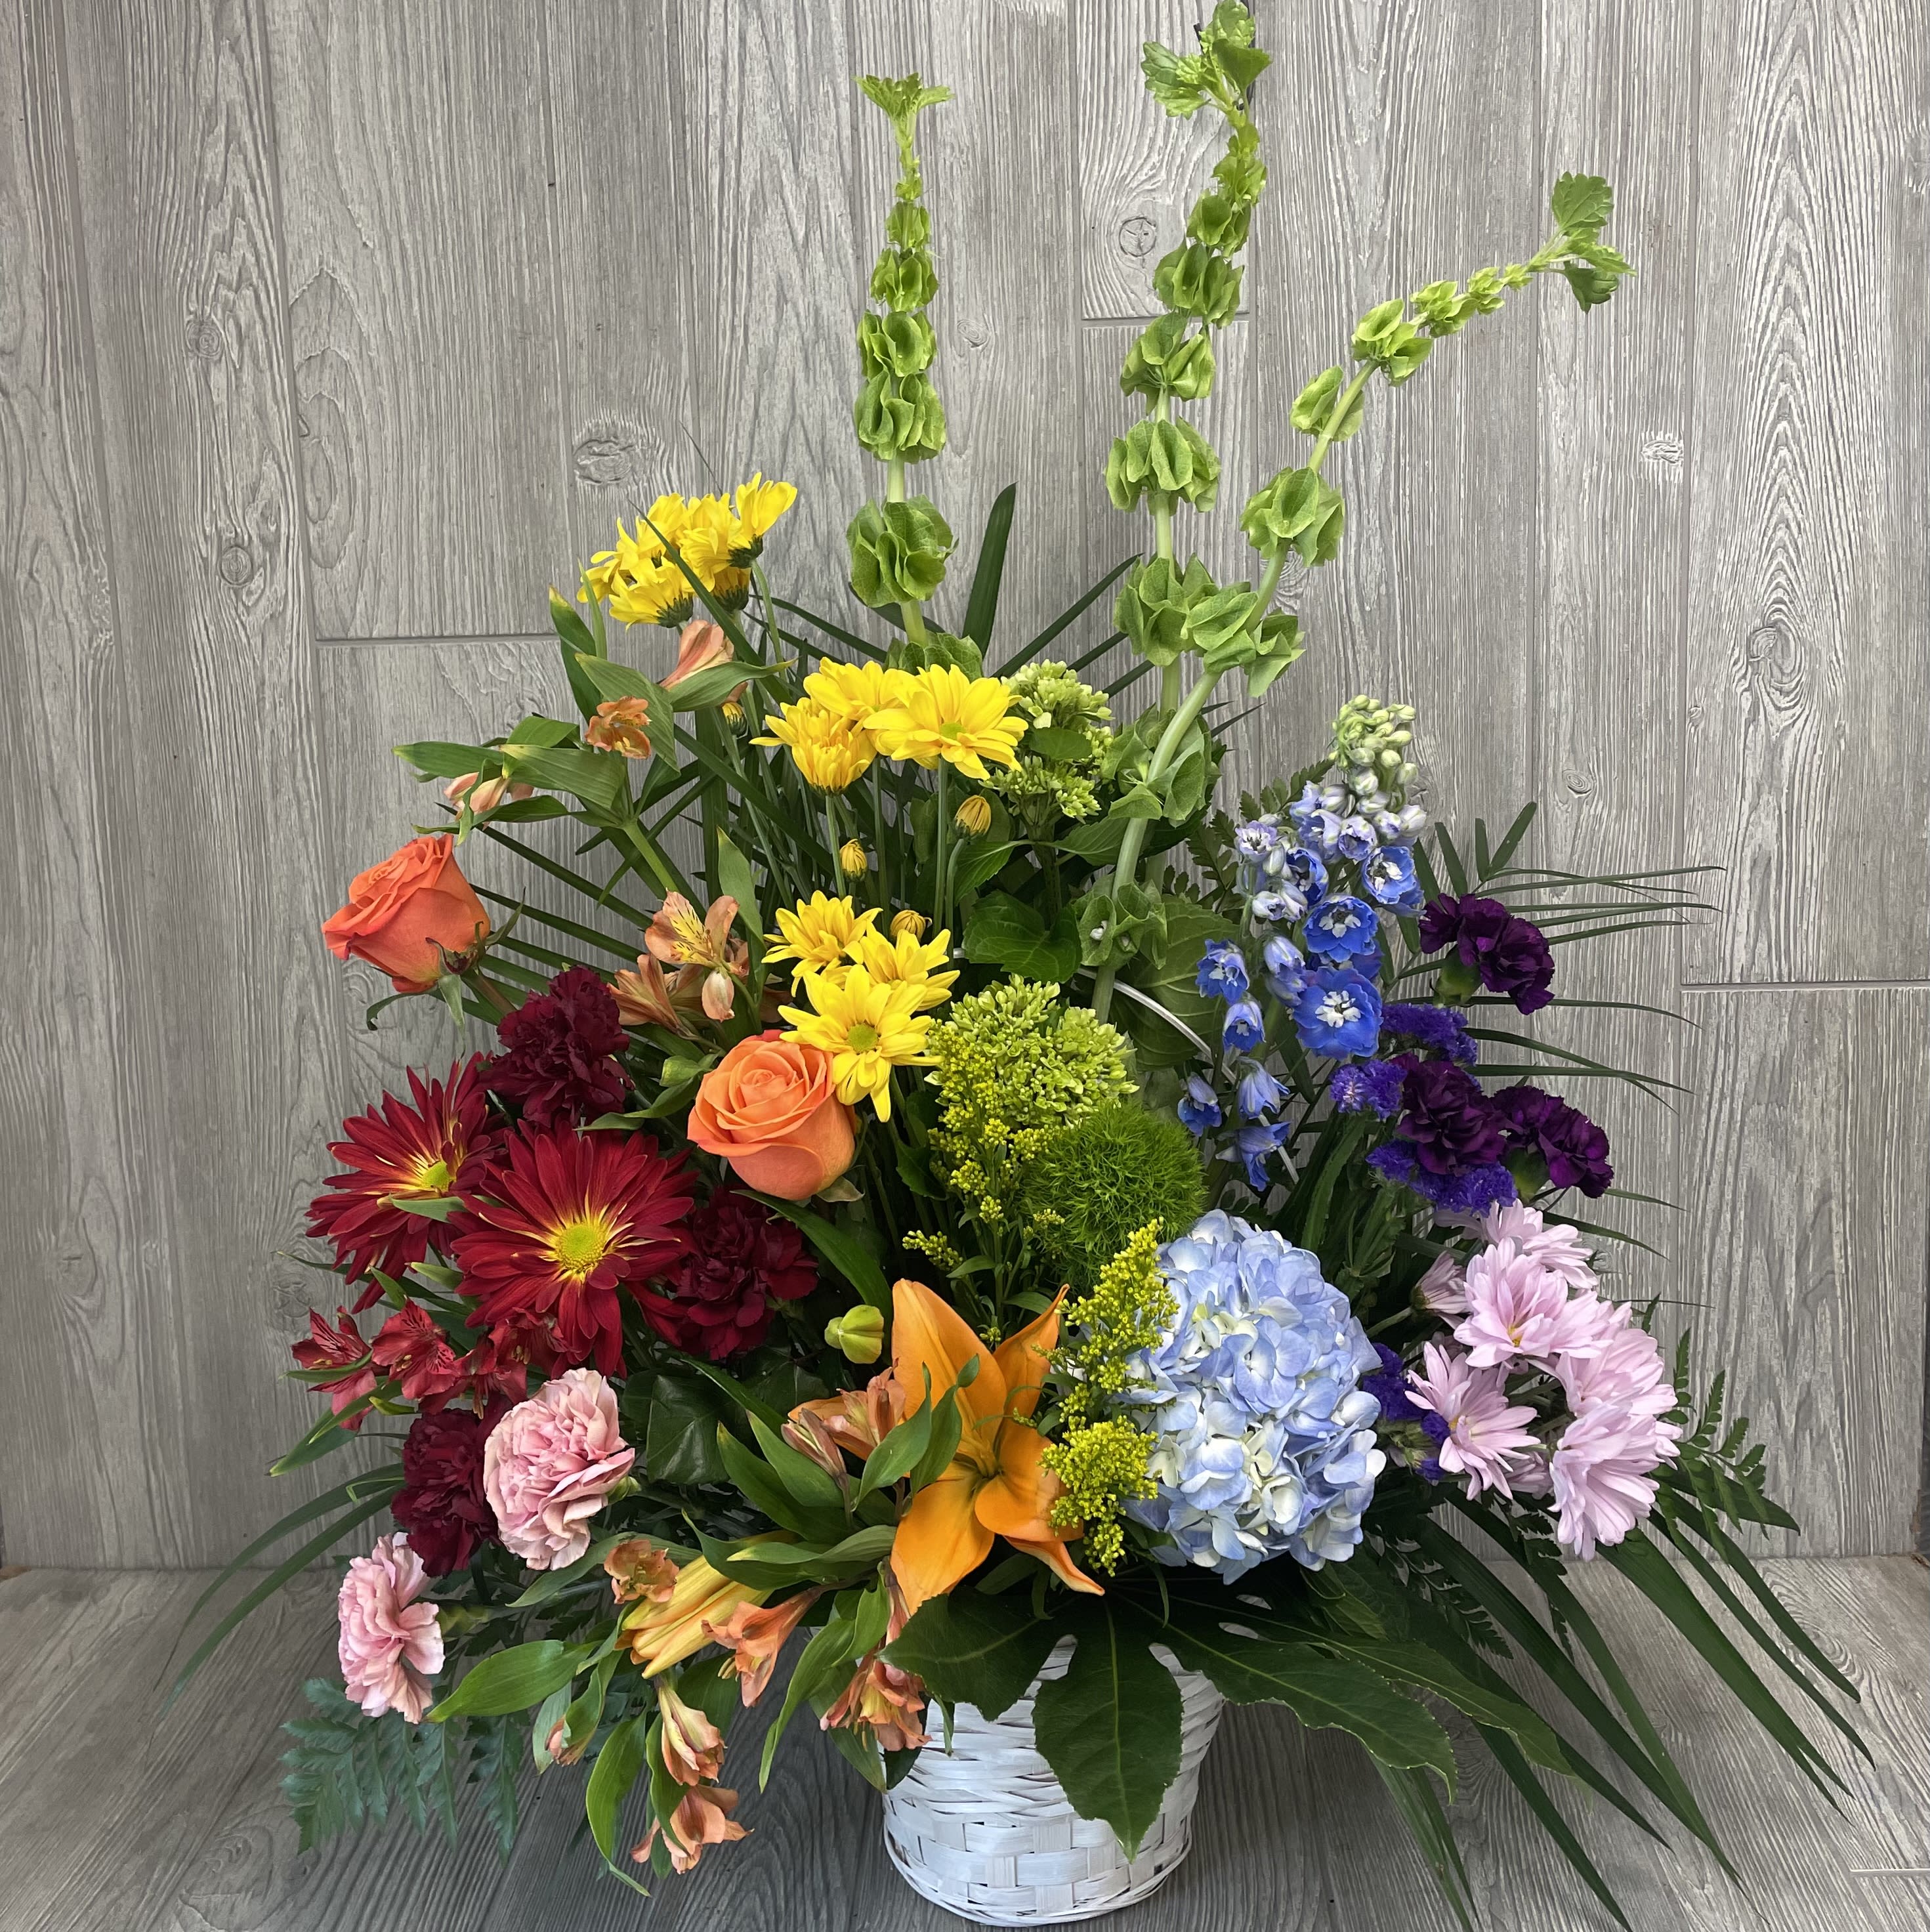 Polychromatic Funeral Basket in Gainesville, FL | The Plant Shoppe Florist